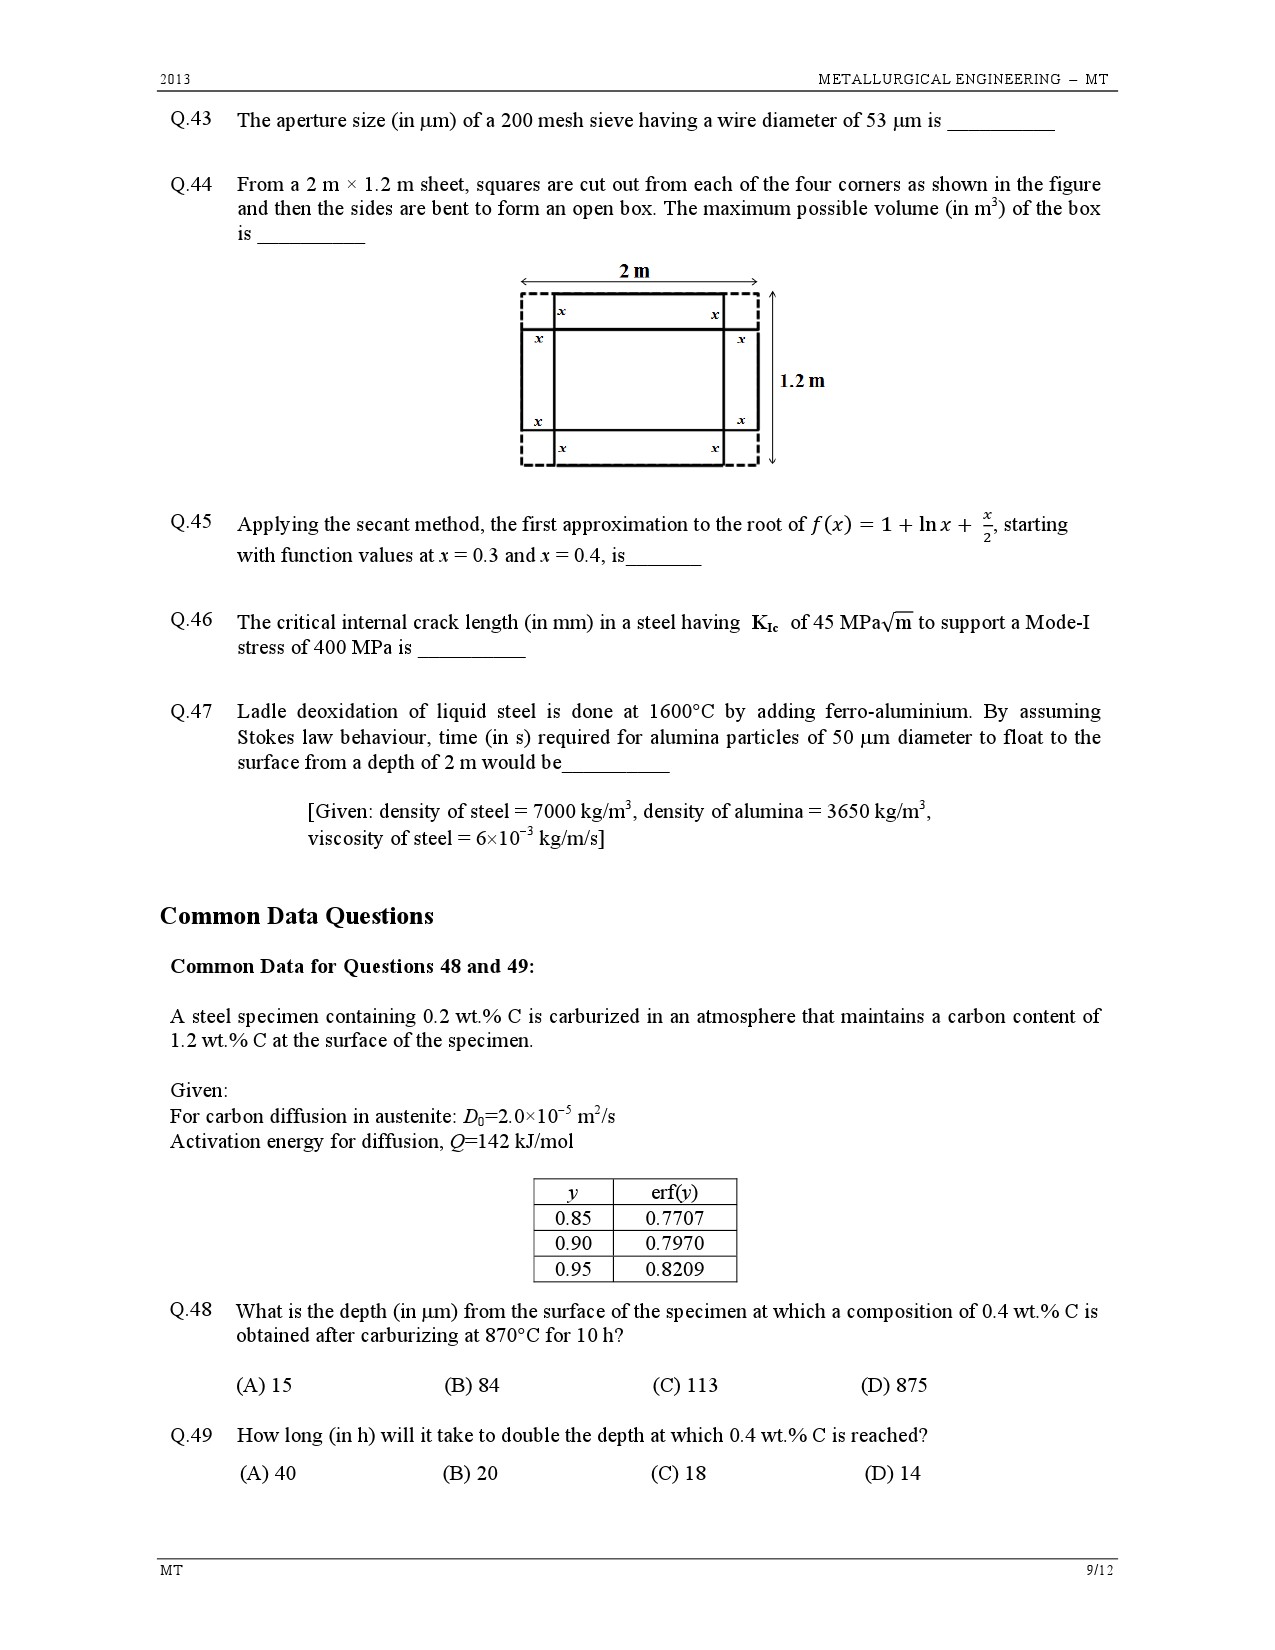 GATE Exam Question Paper 2013 Metallurgical Engineering 9